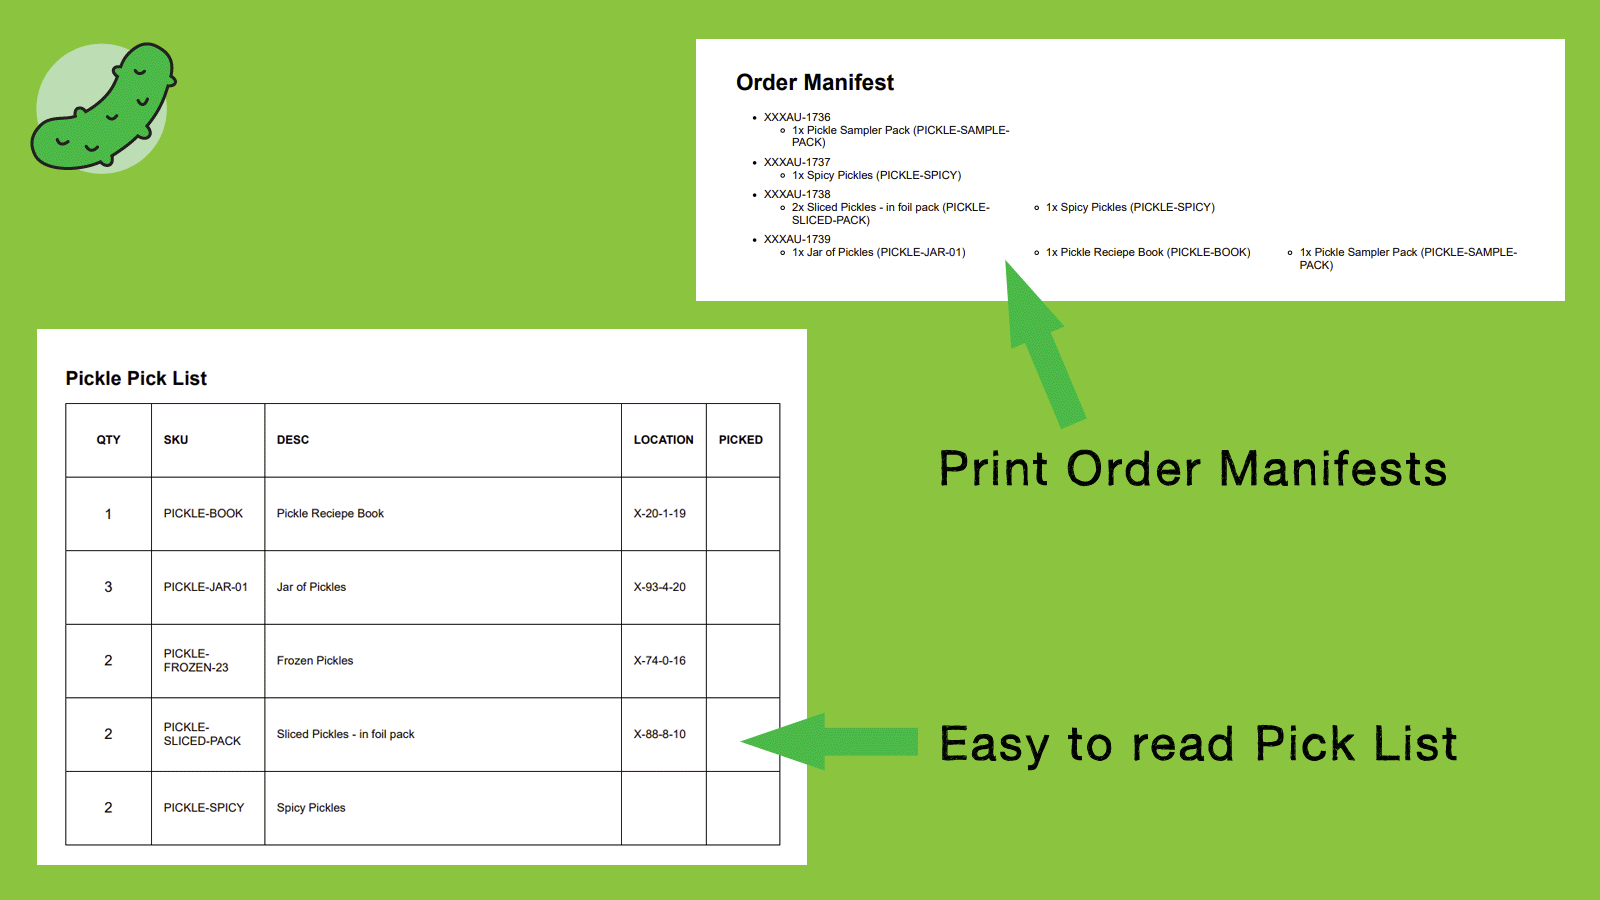 Print easy to read pick list and order manifests